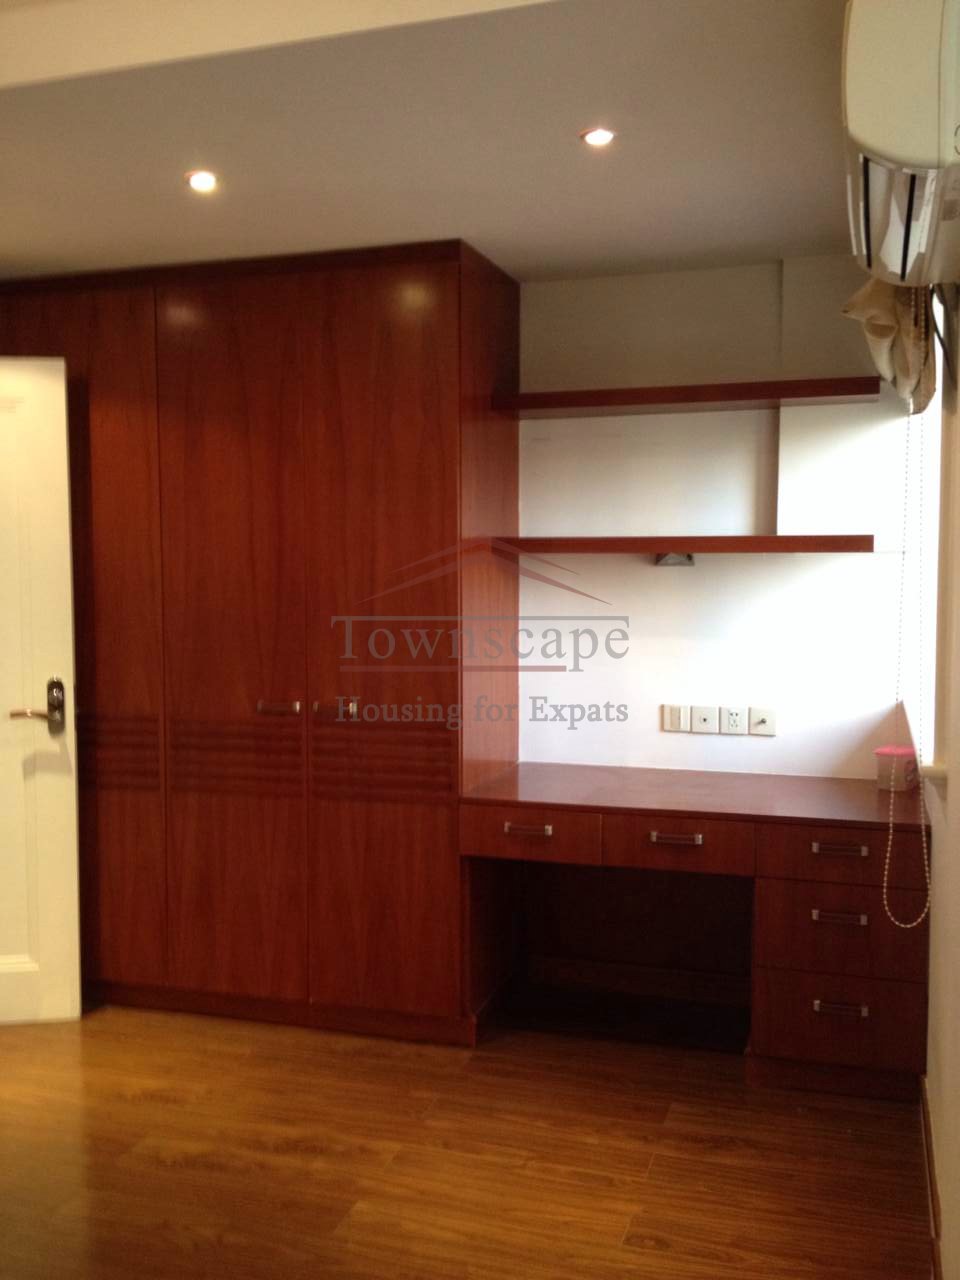 Rent in Shanghai Spacious 2 Bed Apartment in French Concession L9 Jiashan rd